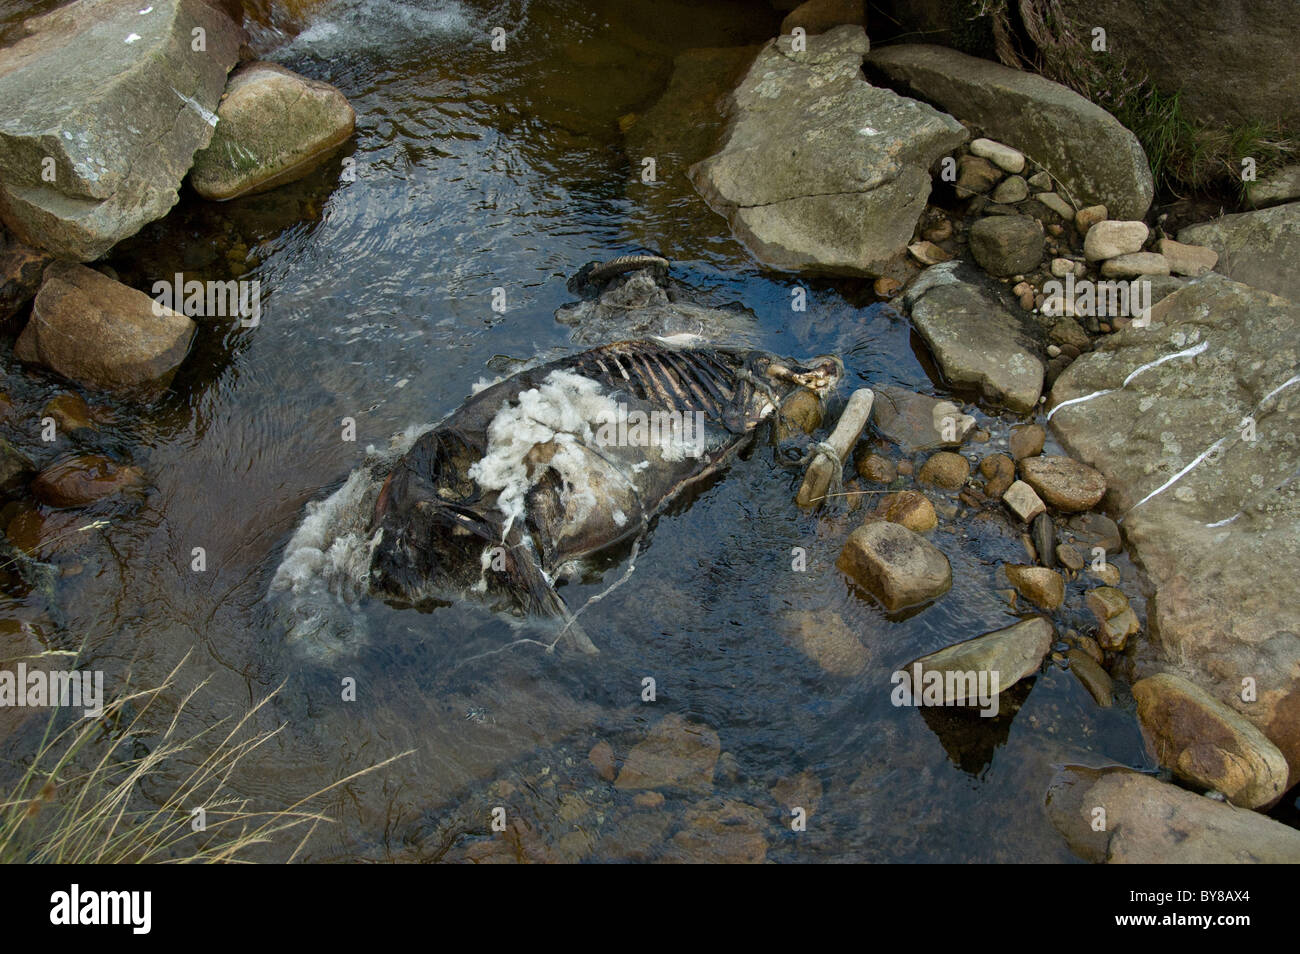 Remains of a dead sheep in a mountain stream Stock Photo